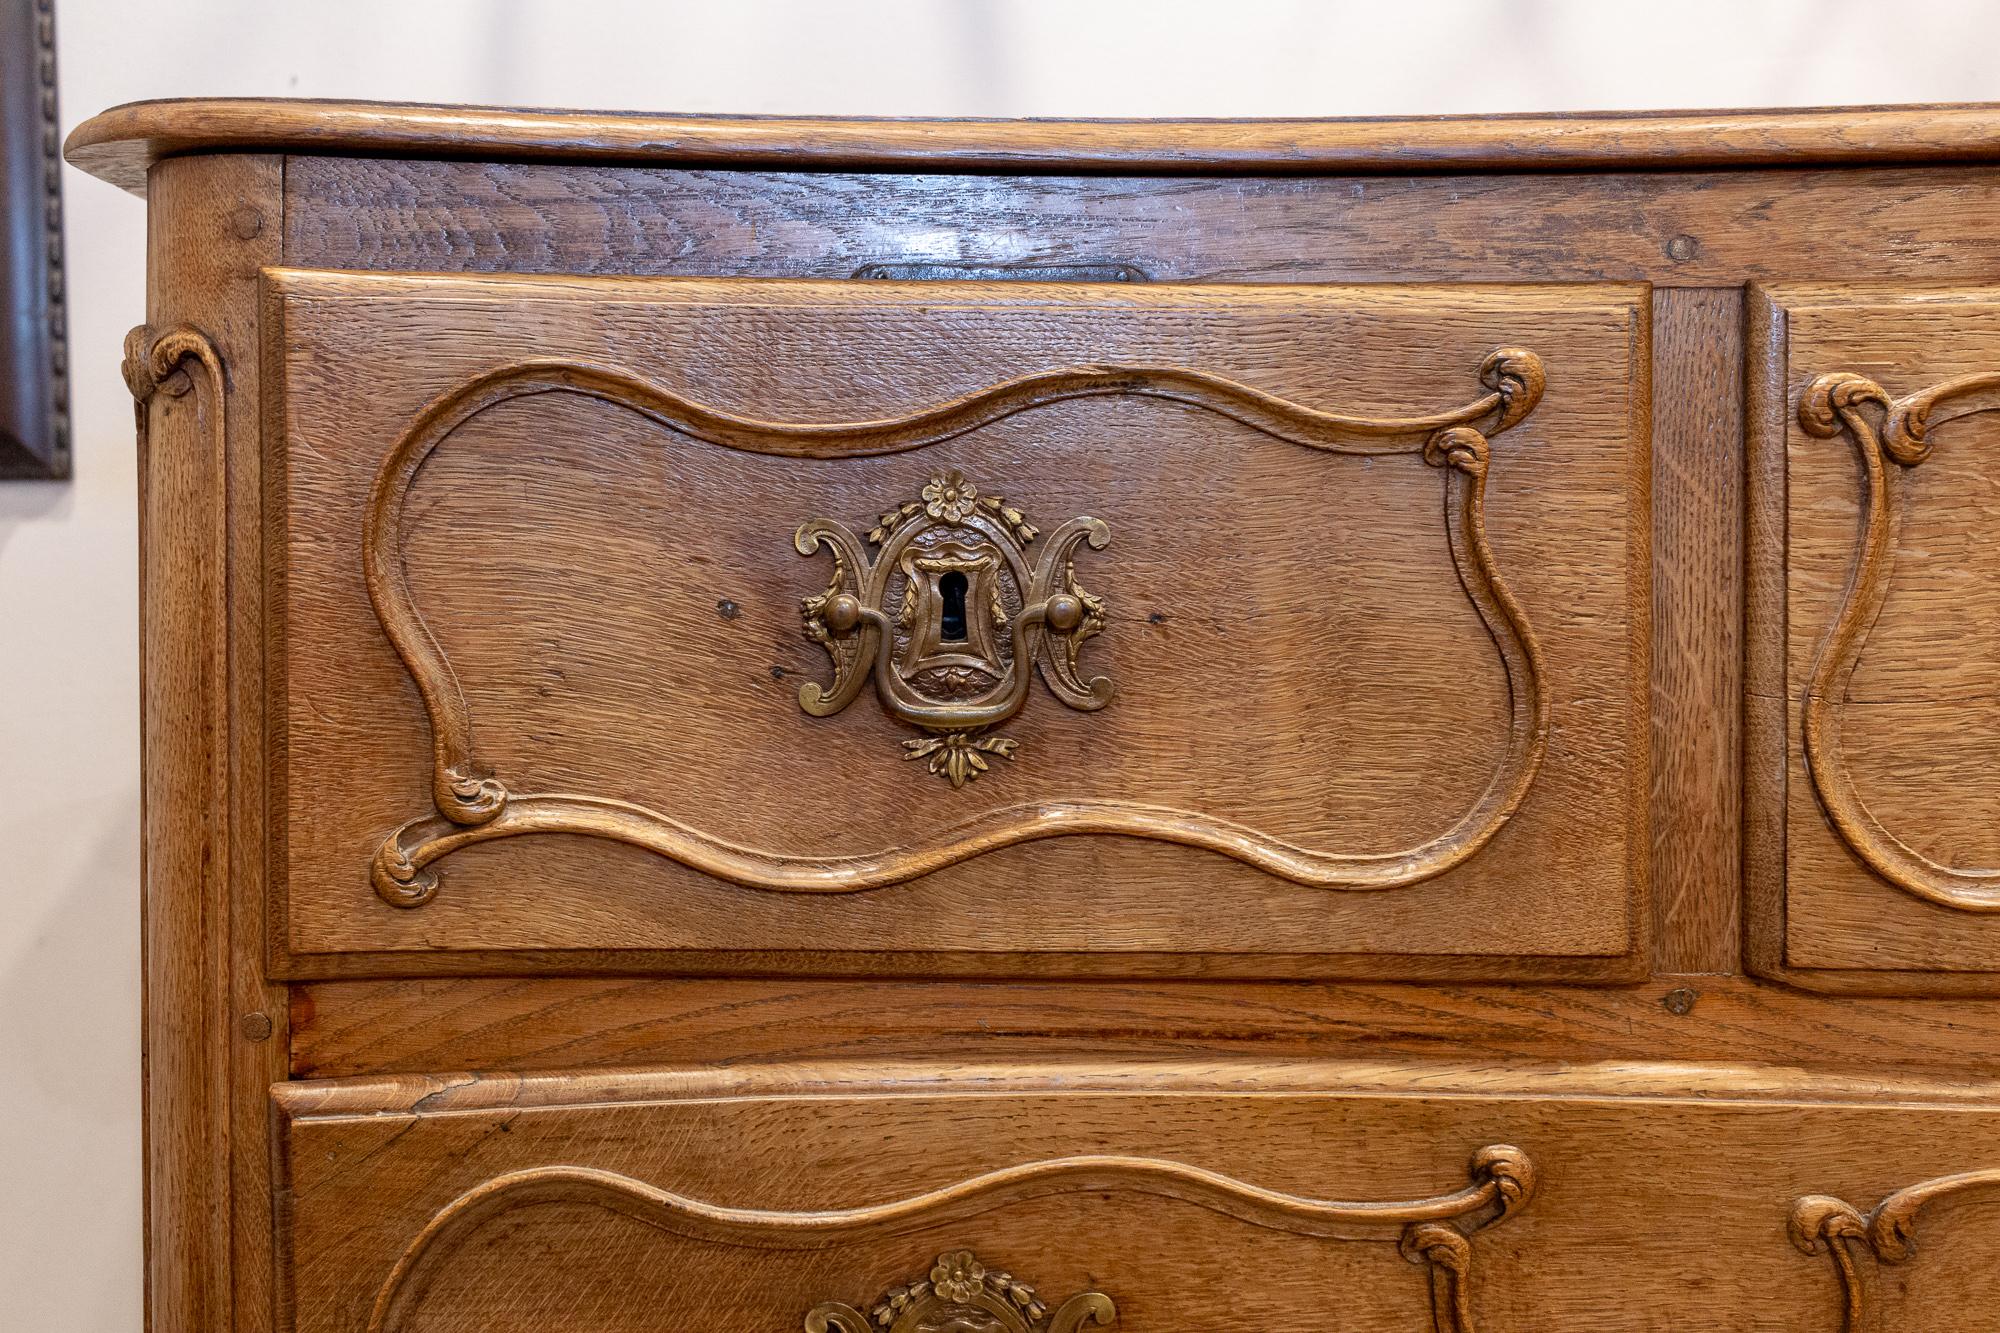 This gorgeous curved-front chest of drawers is French and features a five-drawer configuration, each with wonderful decoration and cast brass hardware. The escutcheon plates at the centre feature various musical instruments and floral imagery, while